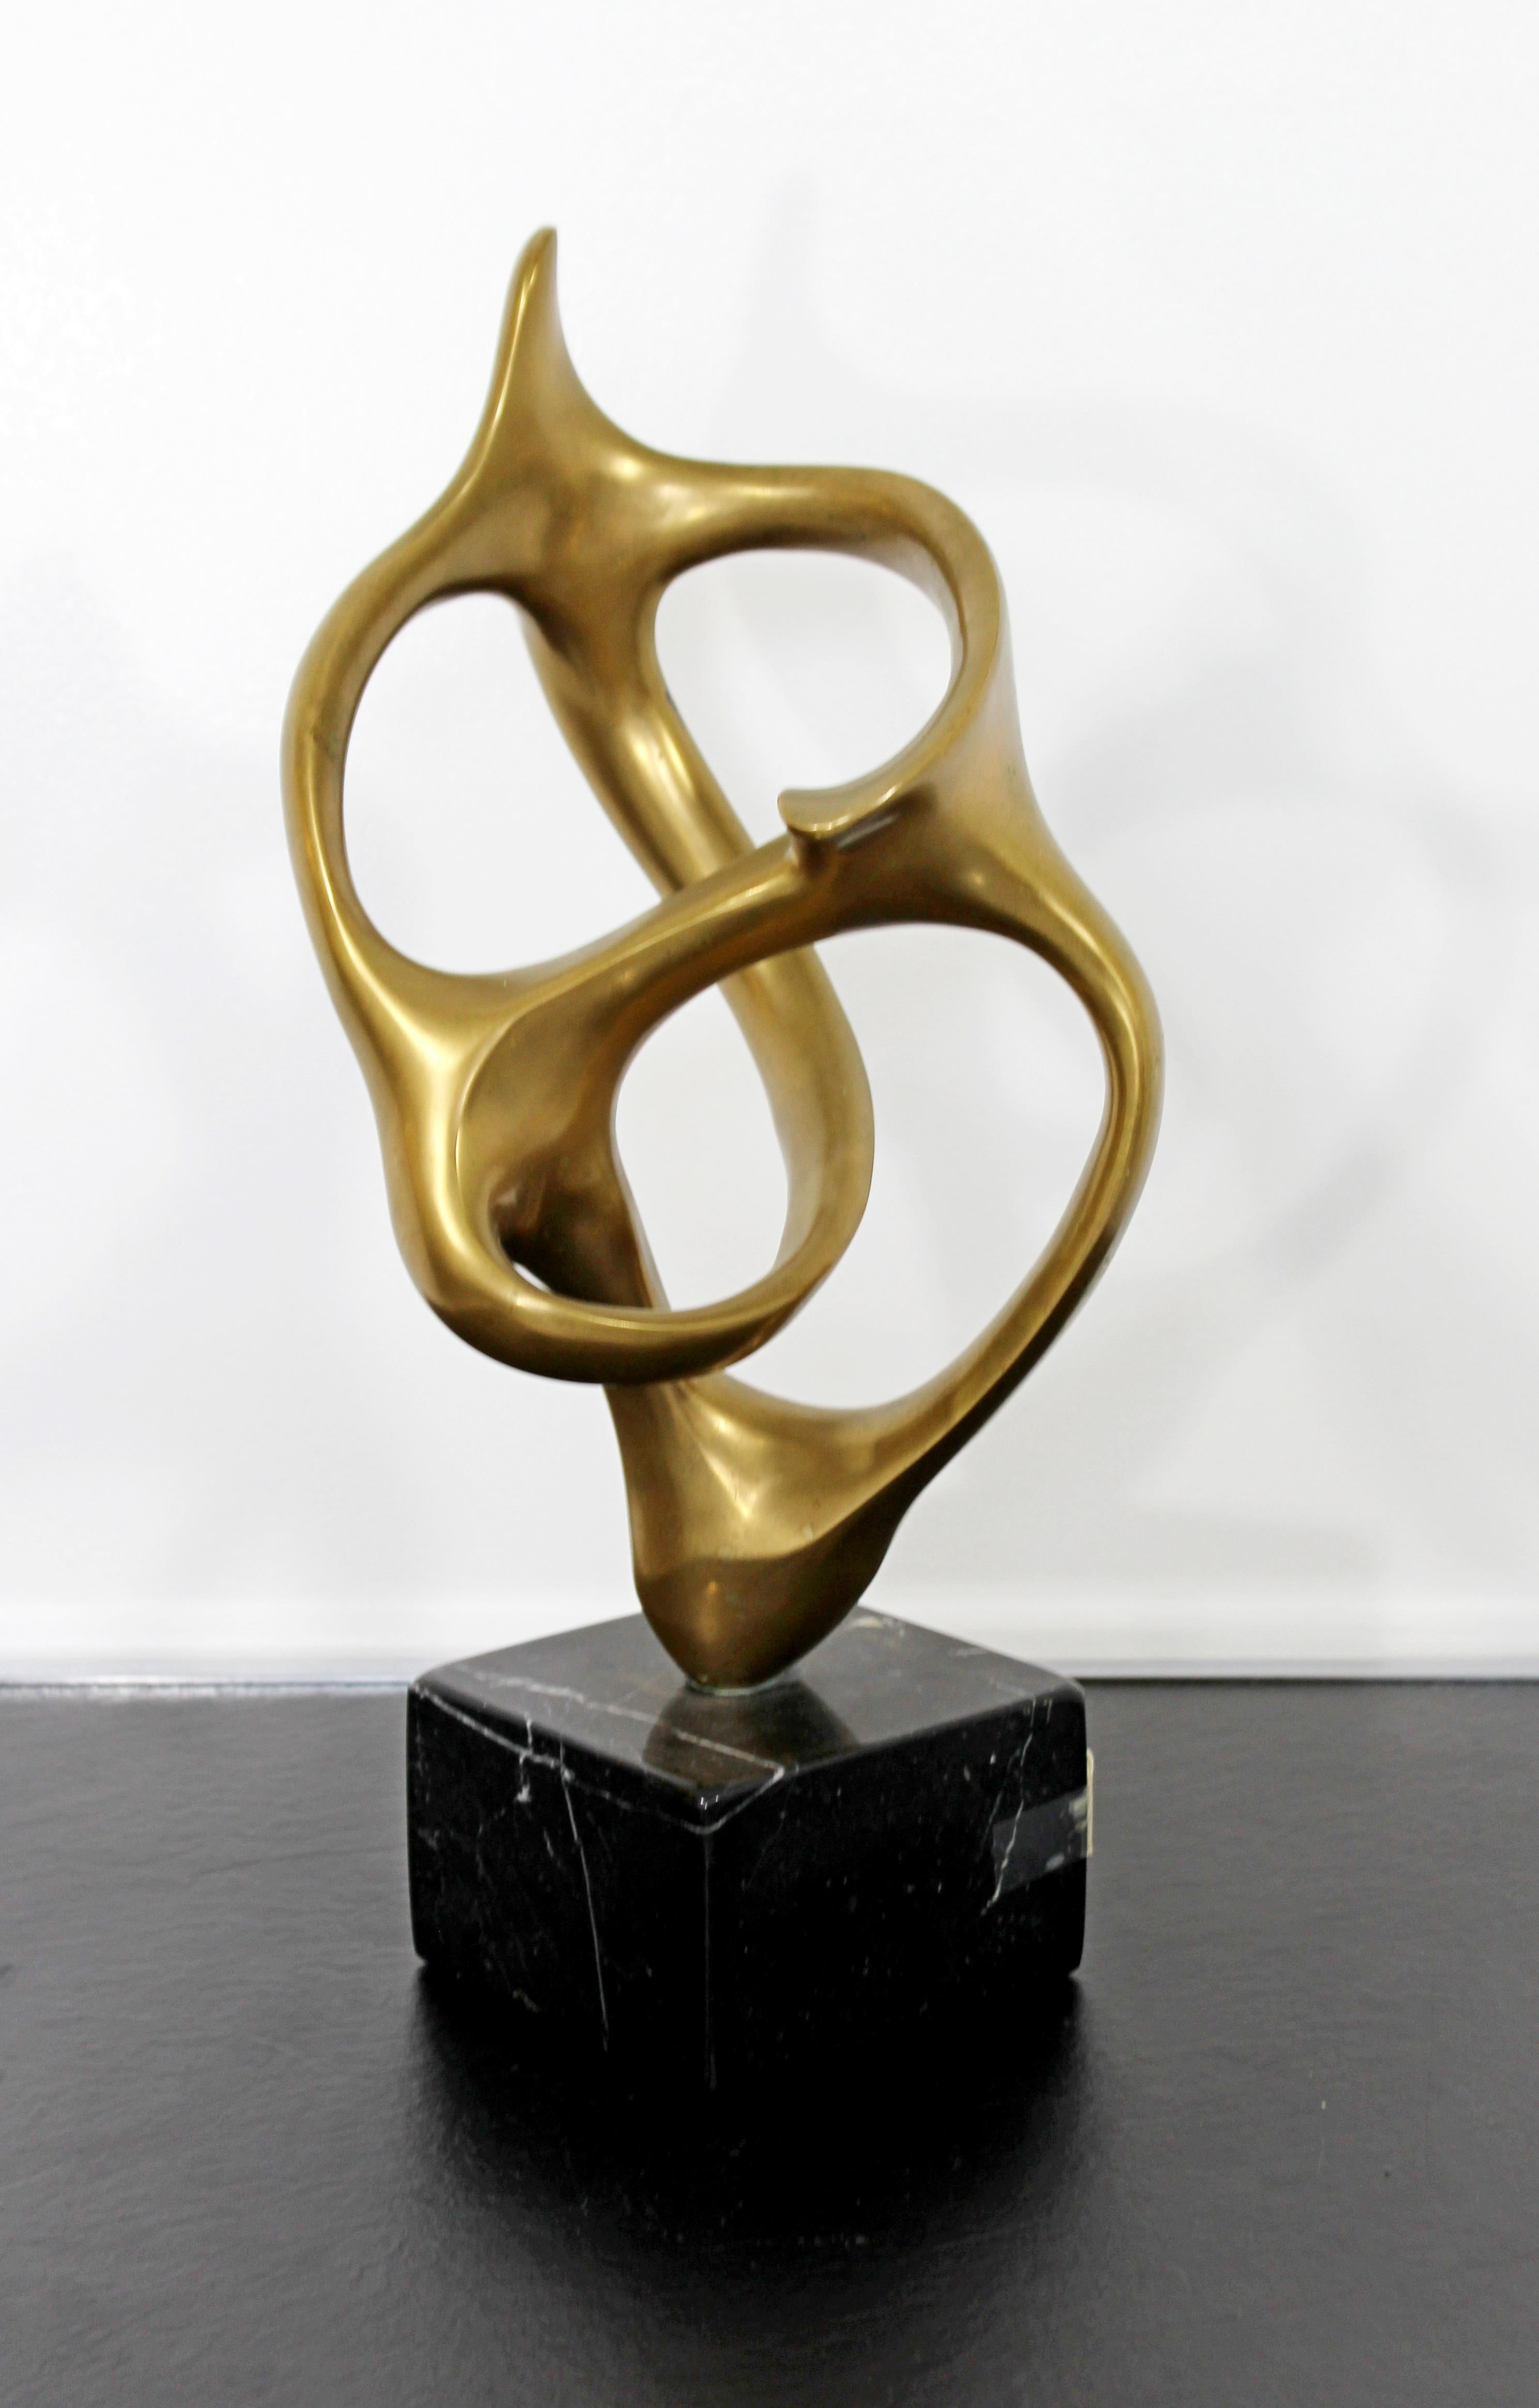 Spanish Contemporary Modern Bronze Marble Table Sculpture Signed by Kieff Grediaga AP